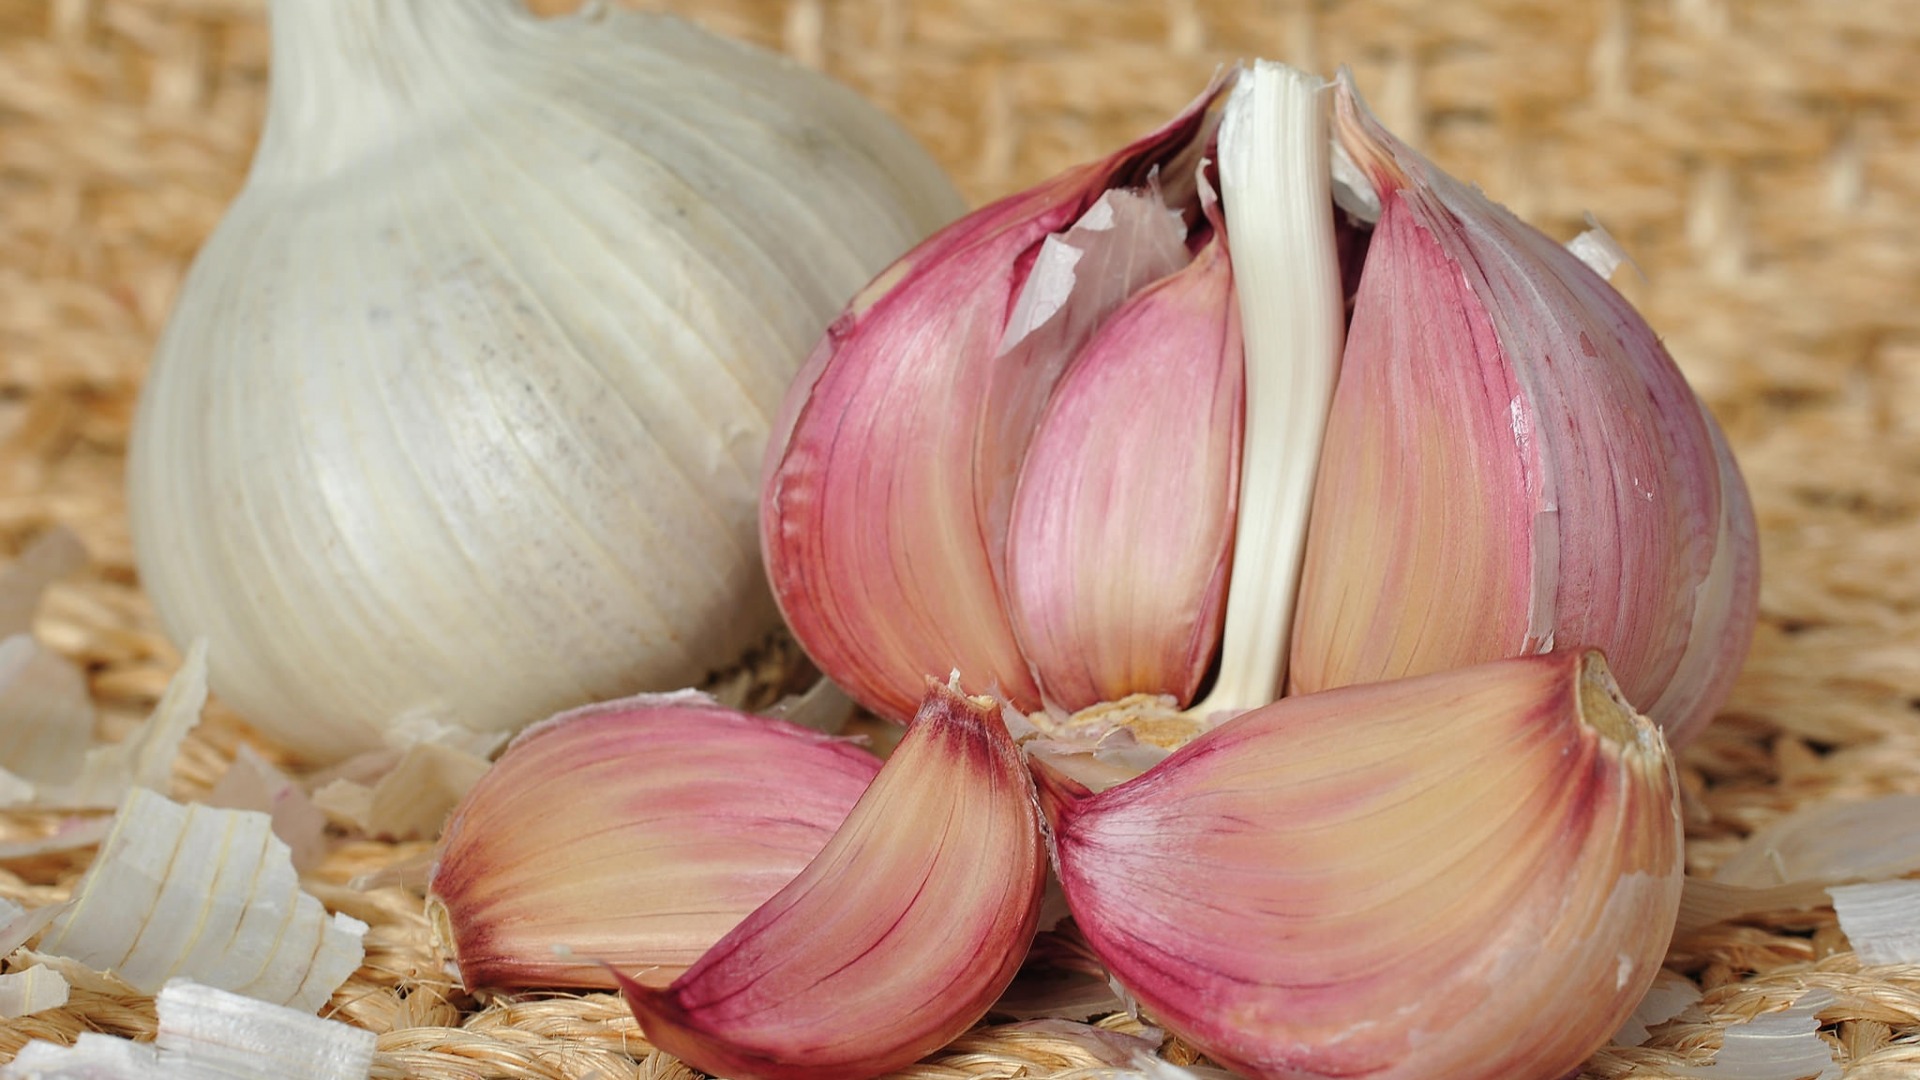 eating a clove of garlic before bed will do this to your